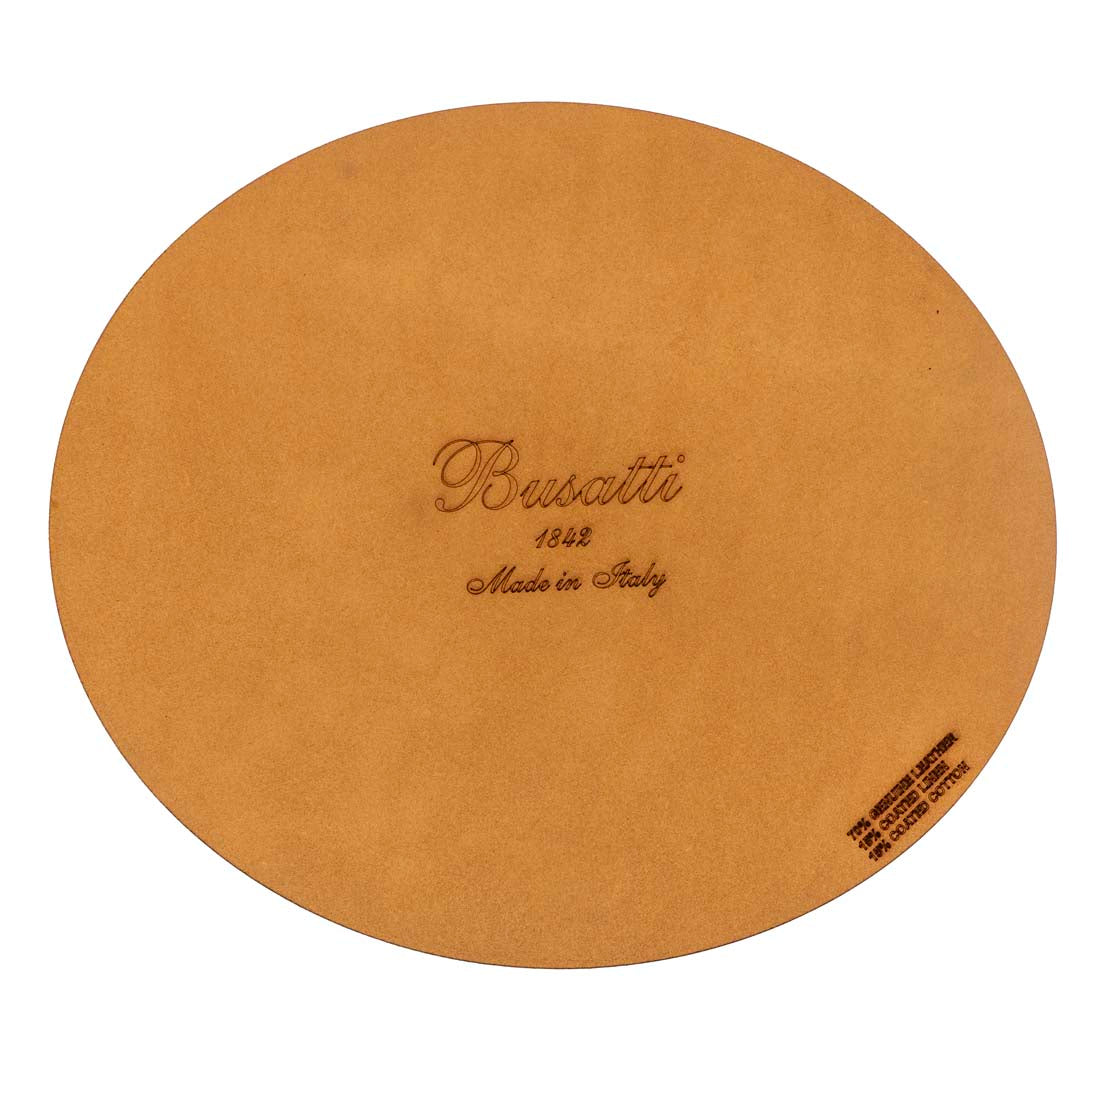 Donna di Coppe Coated Leather Placemat